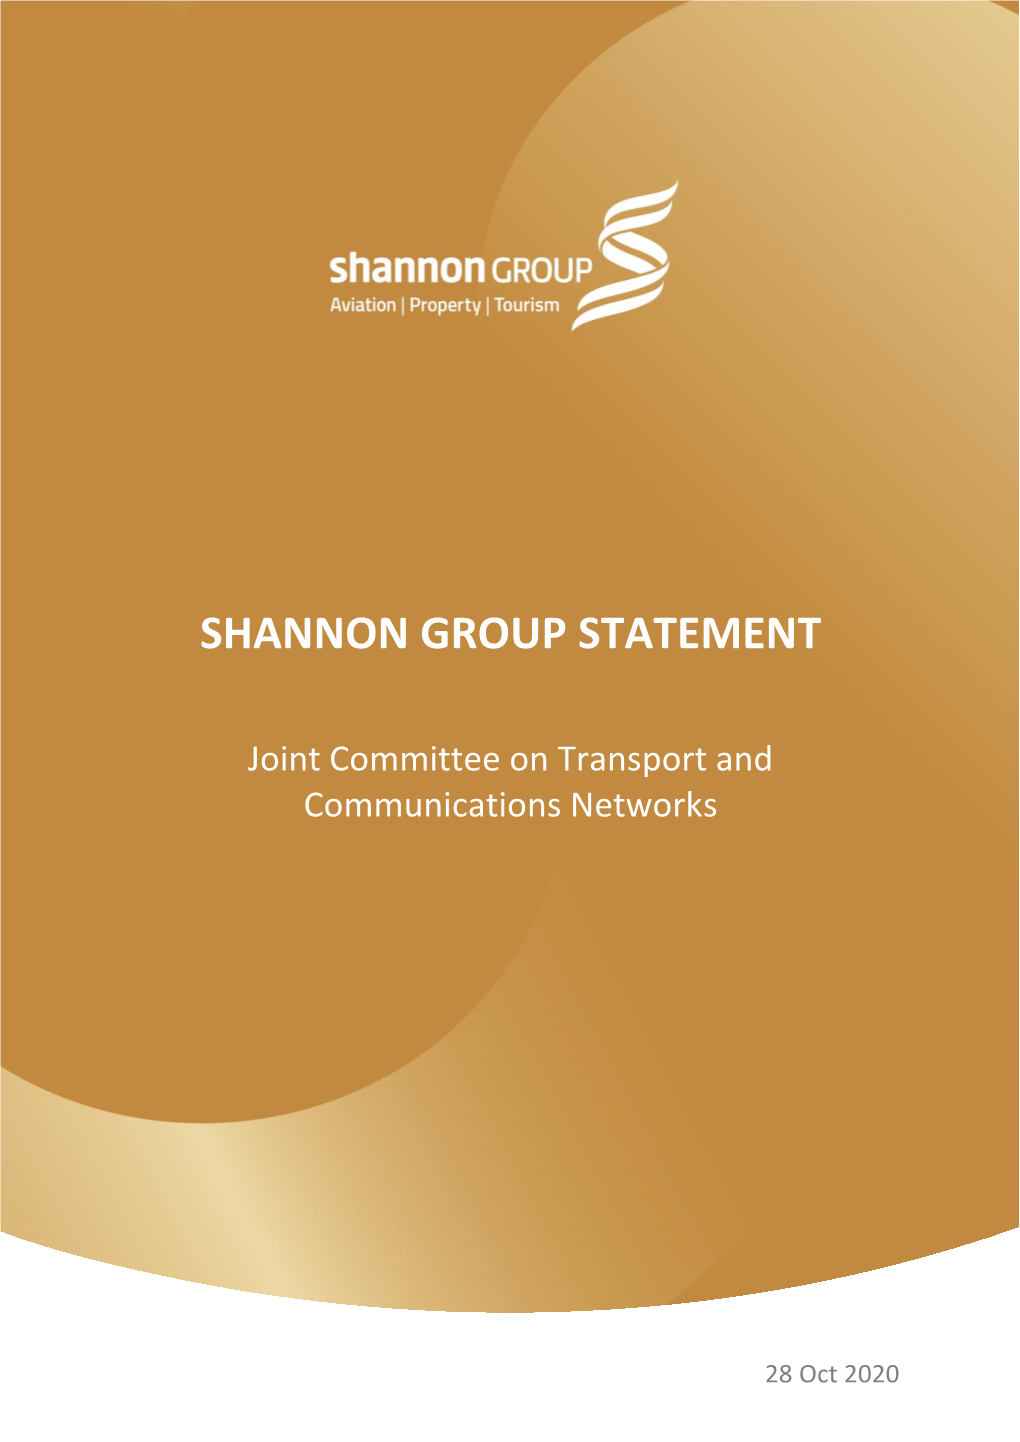 Shannon Group Statement